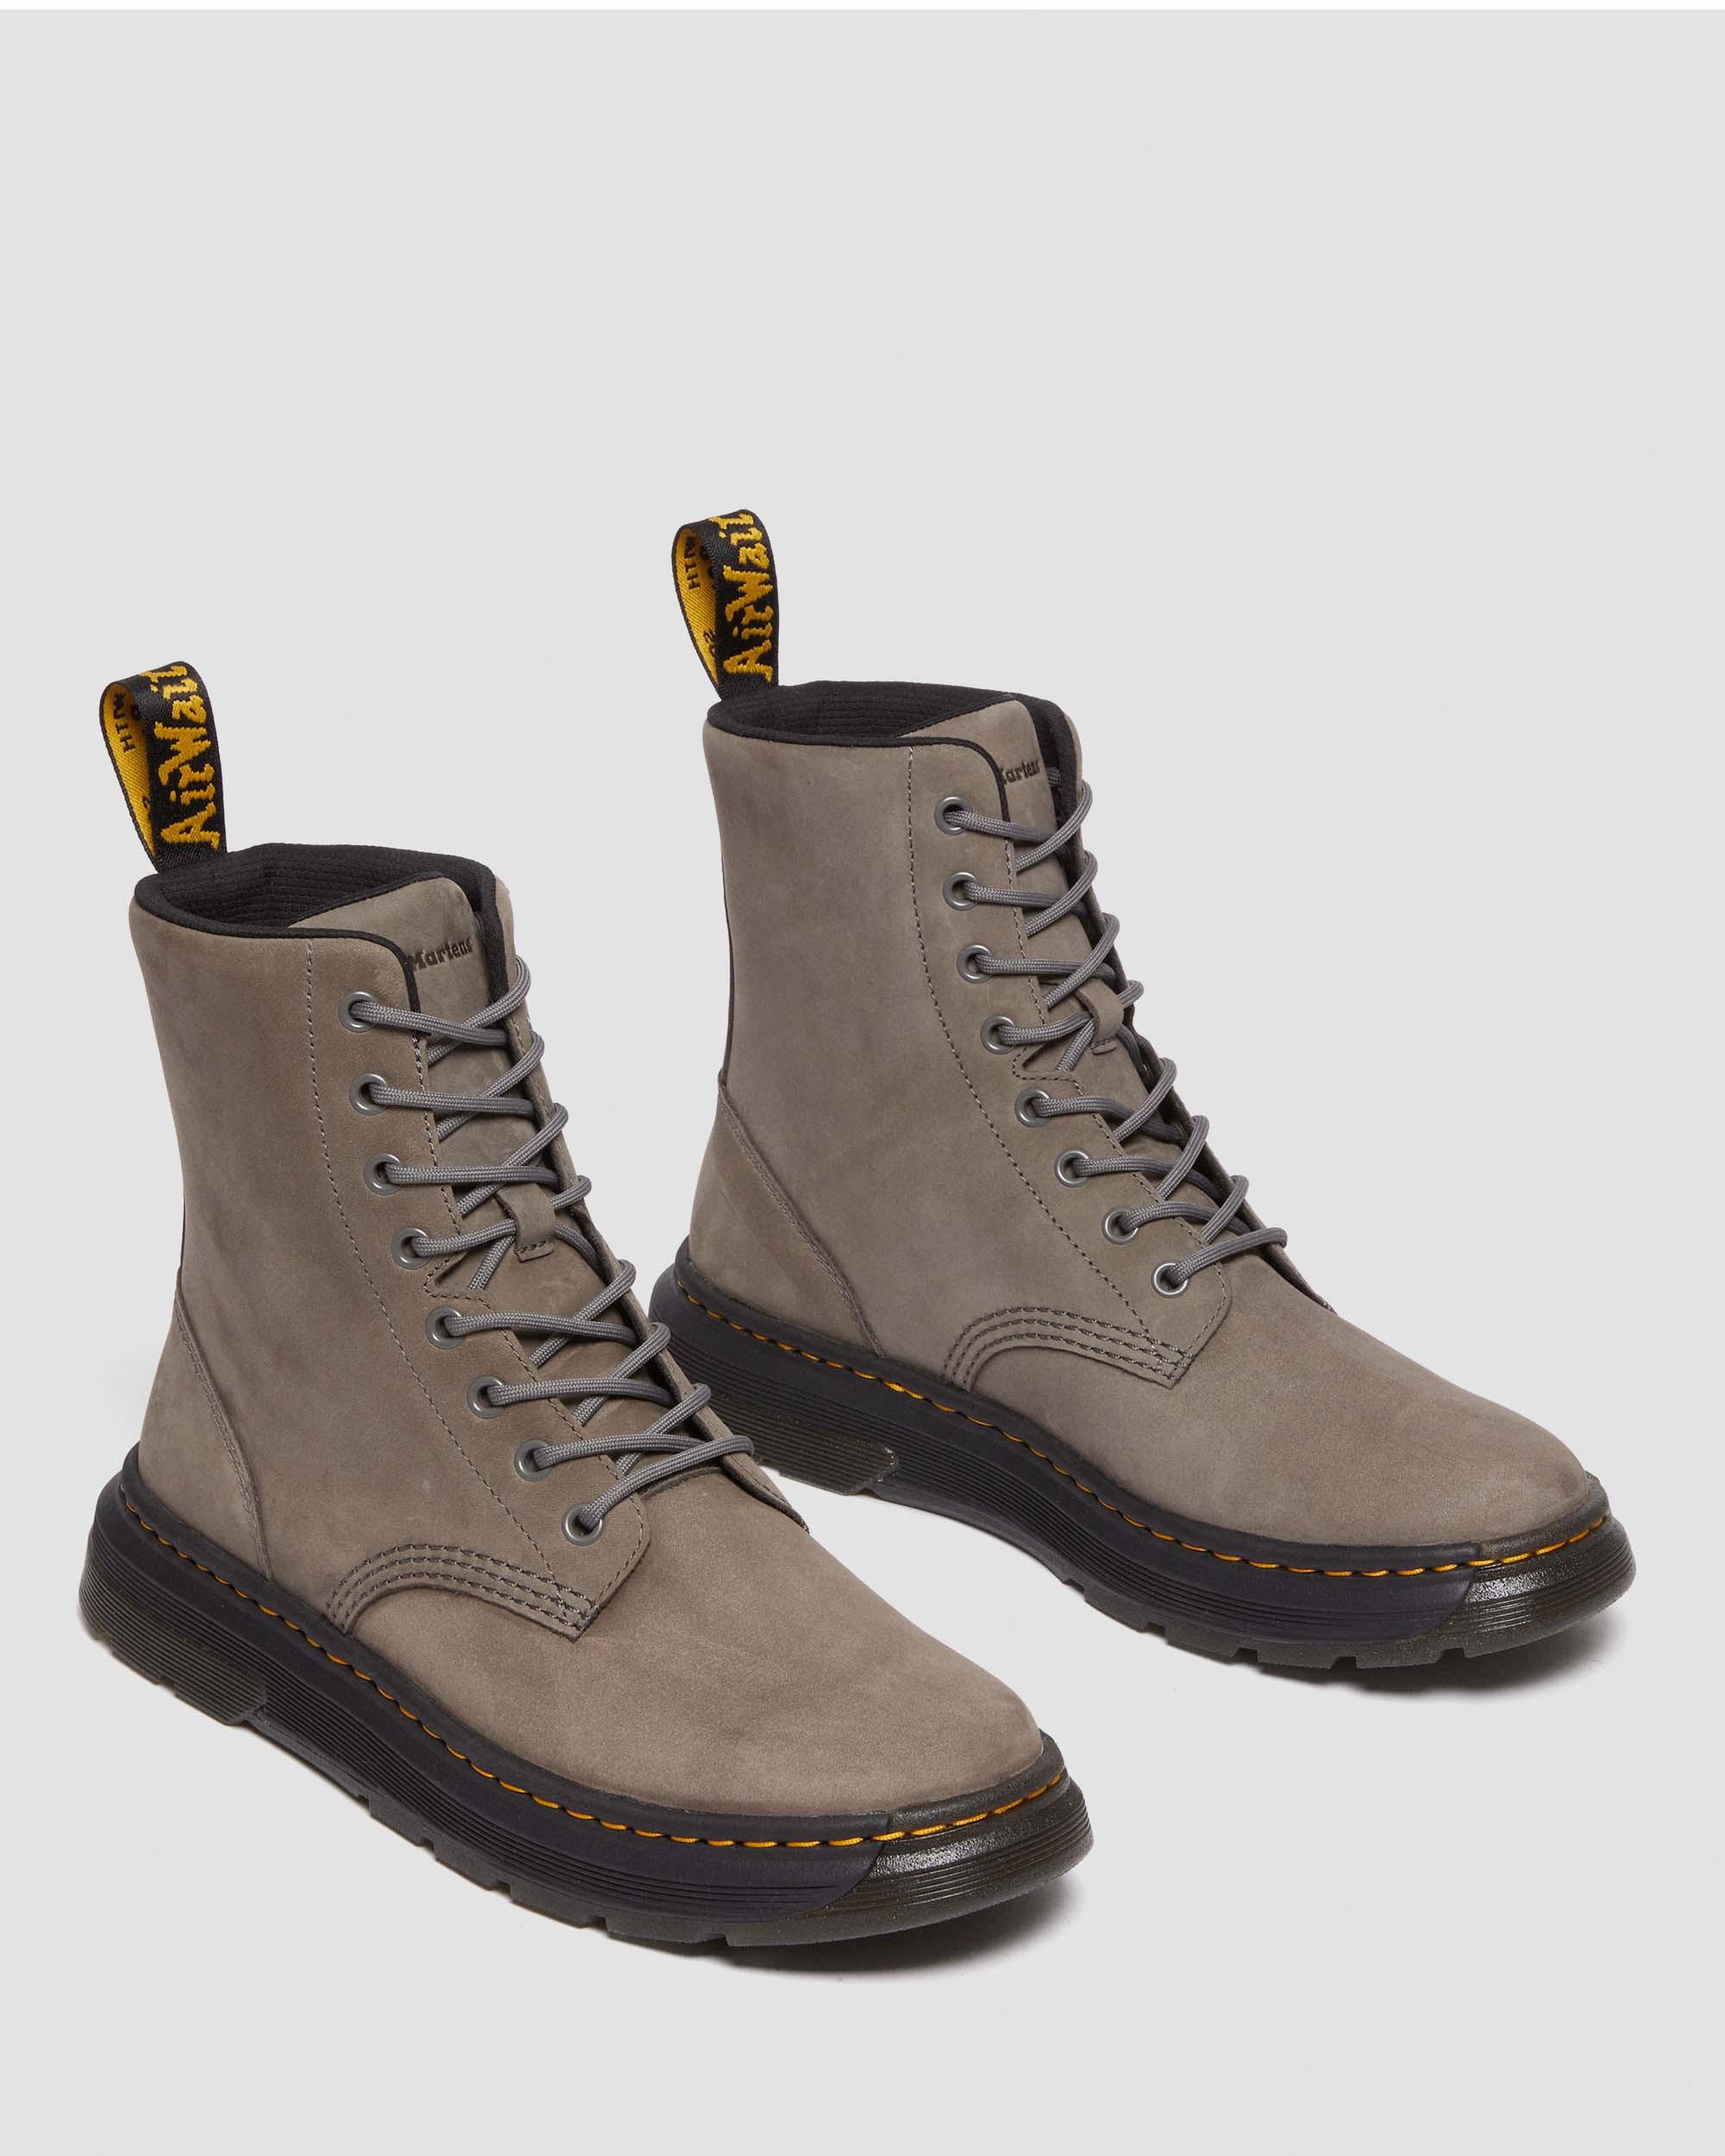 Crewson Leather Lace Up Boots in GUNMETAL